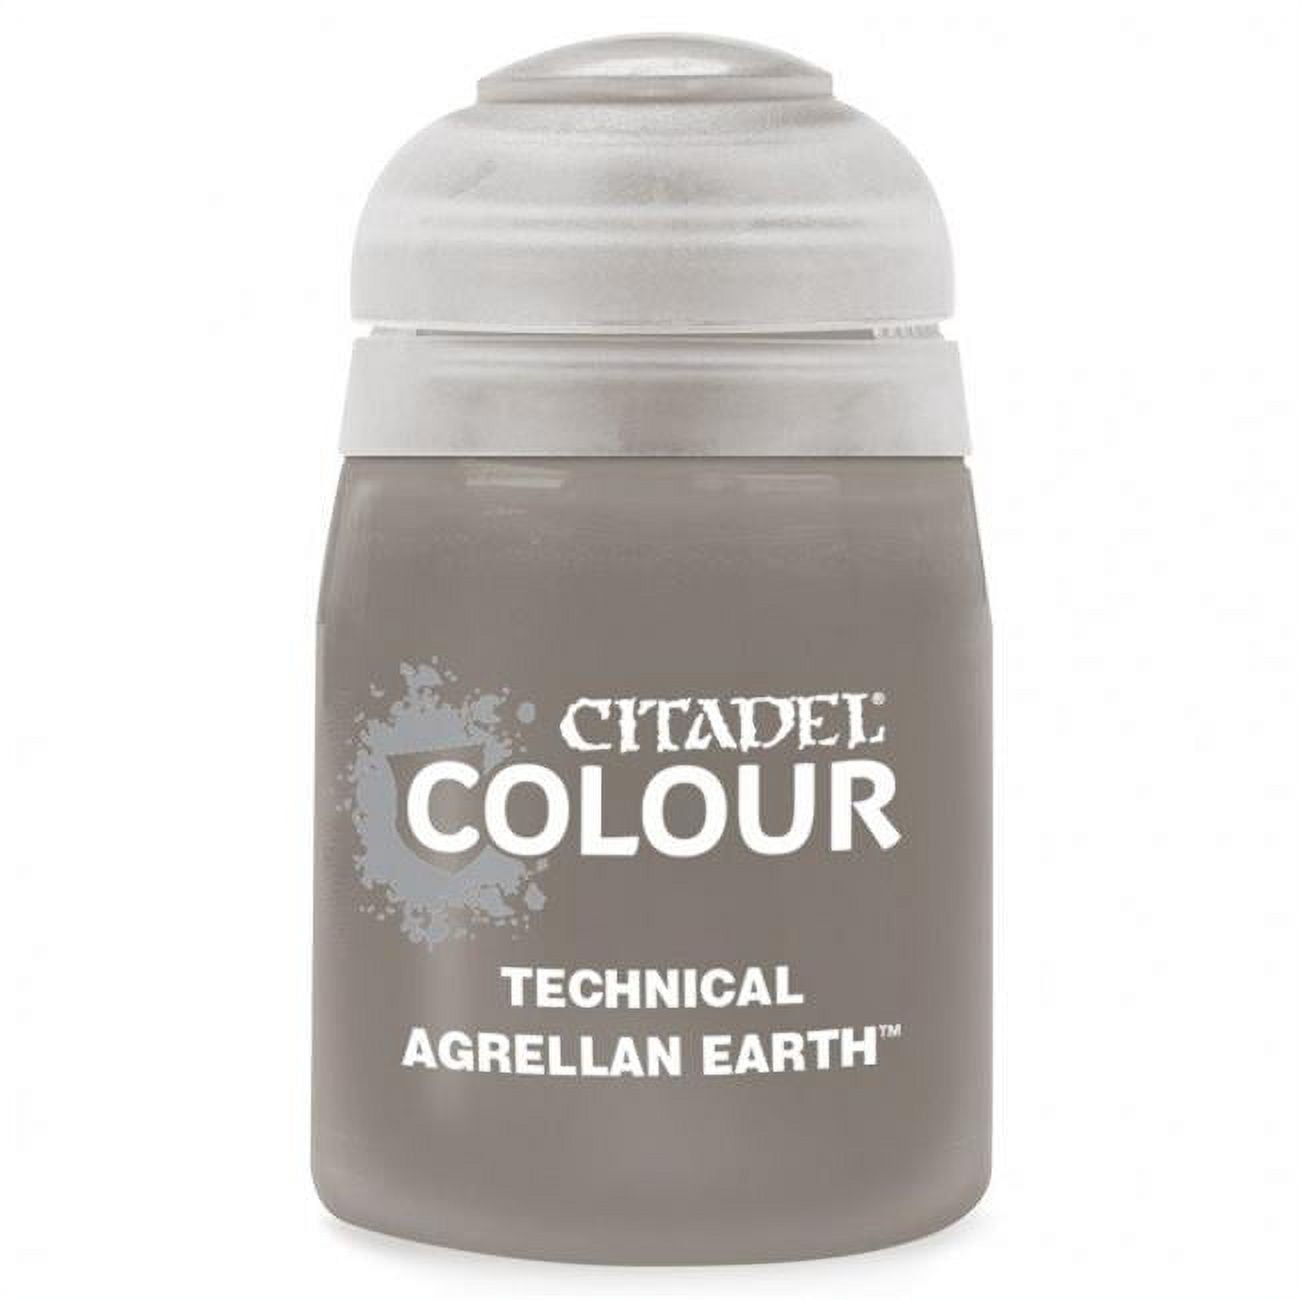 Citadel Colour: Technical Contrast Medium By Games Workshop 27-33 In stock